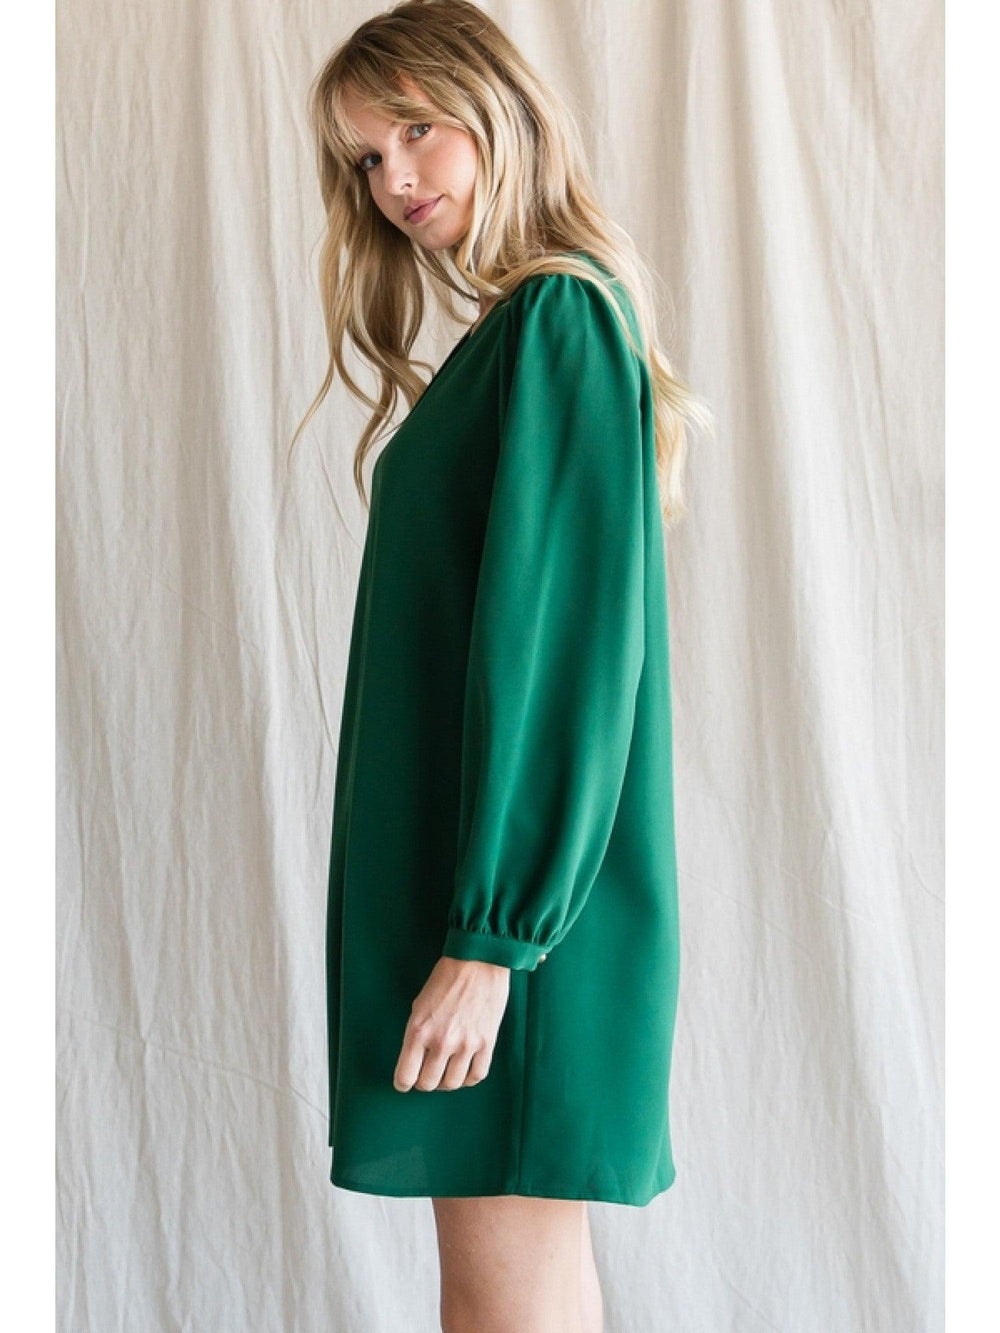 gift boutique with dresses houston texas tres chic green long sleeve a line